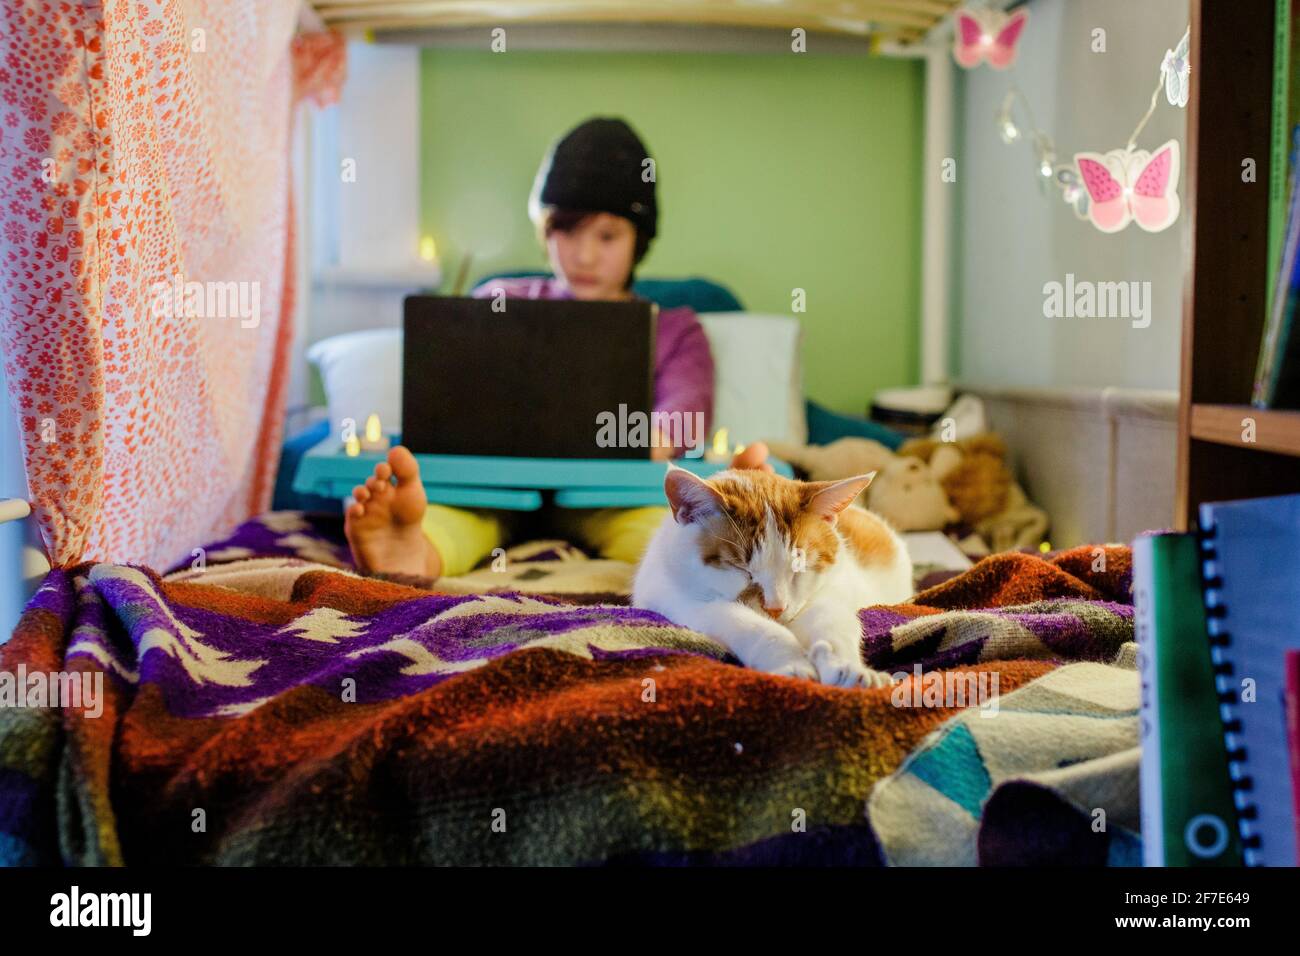 A cat in foreground stretches out on bed with boy on computer in back Stock Photo